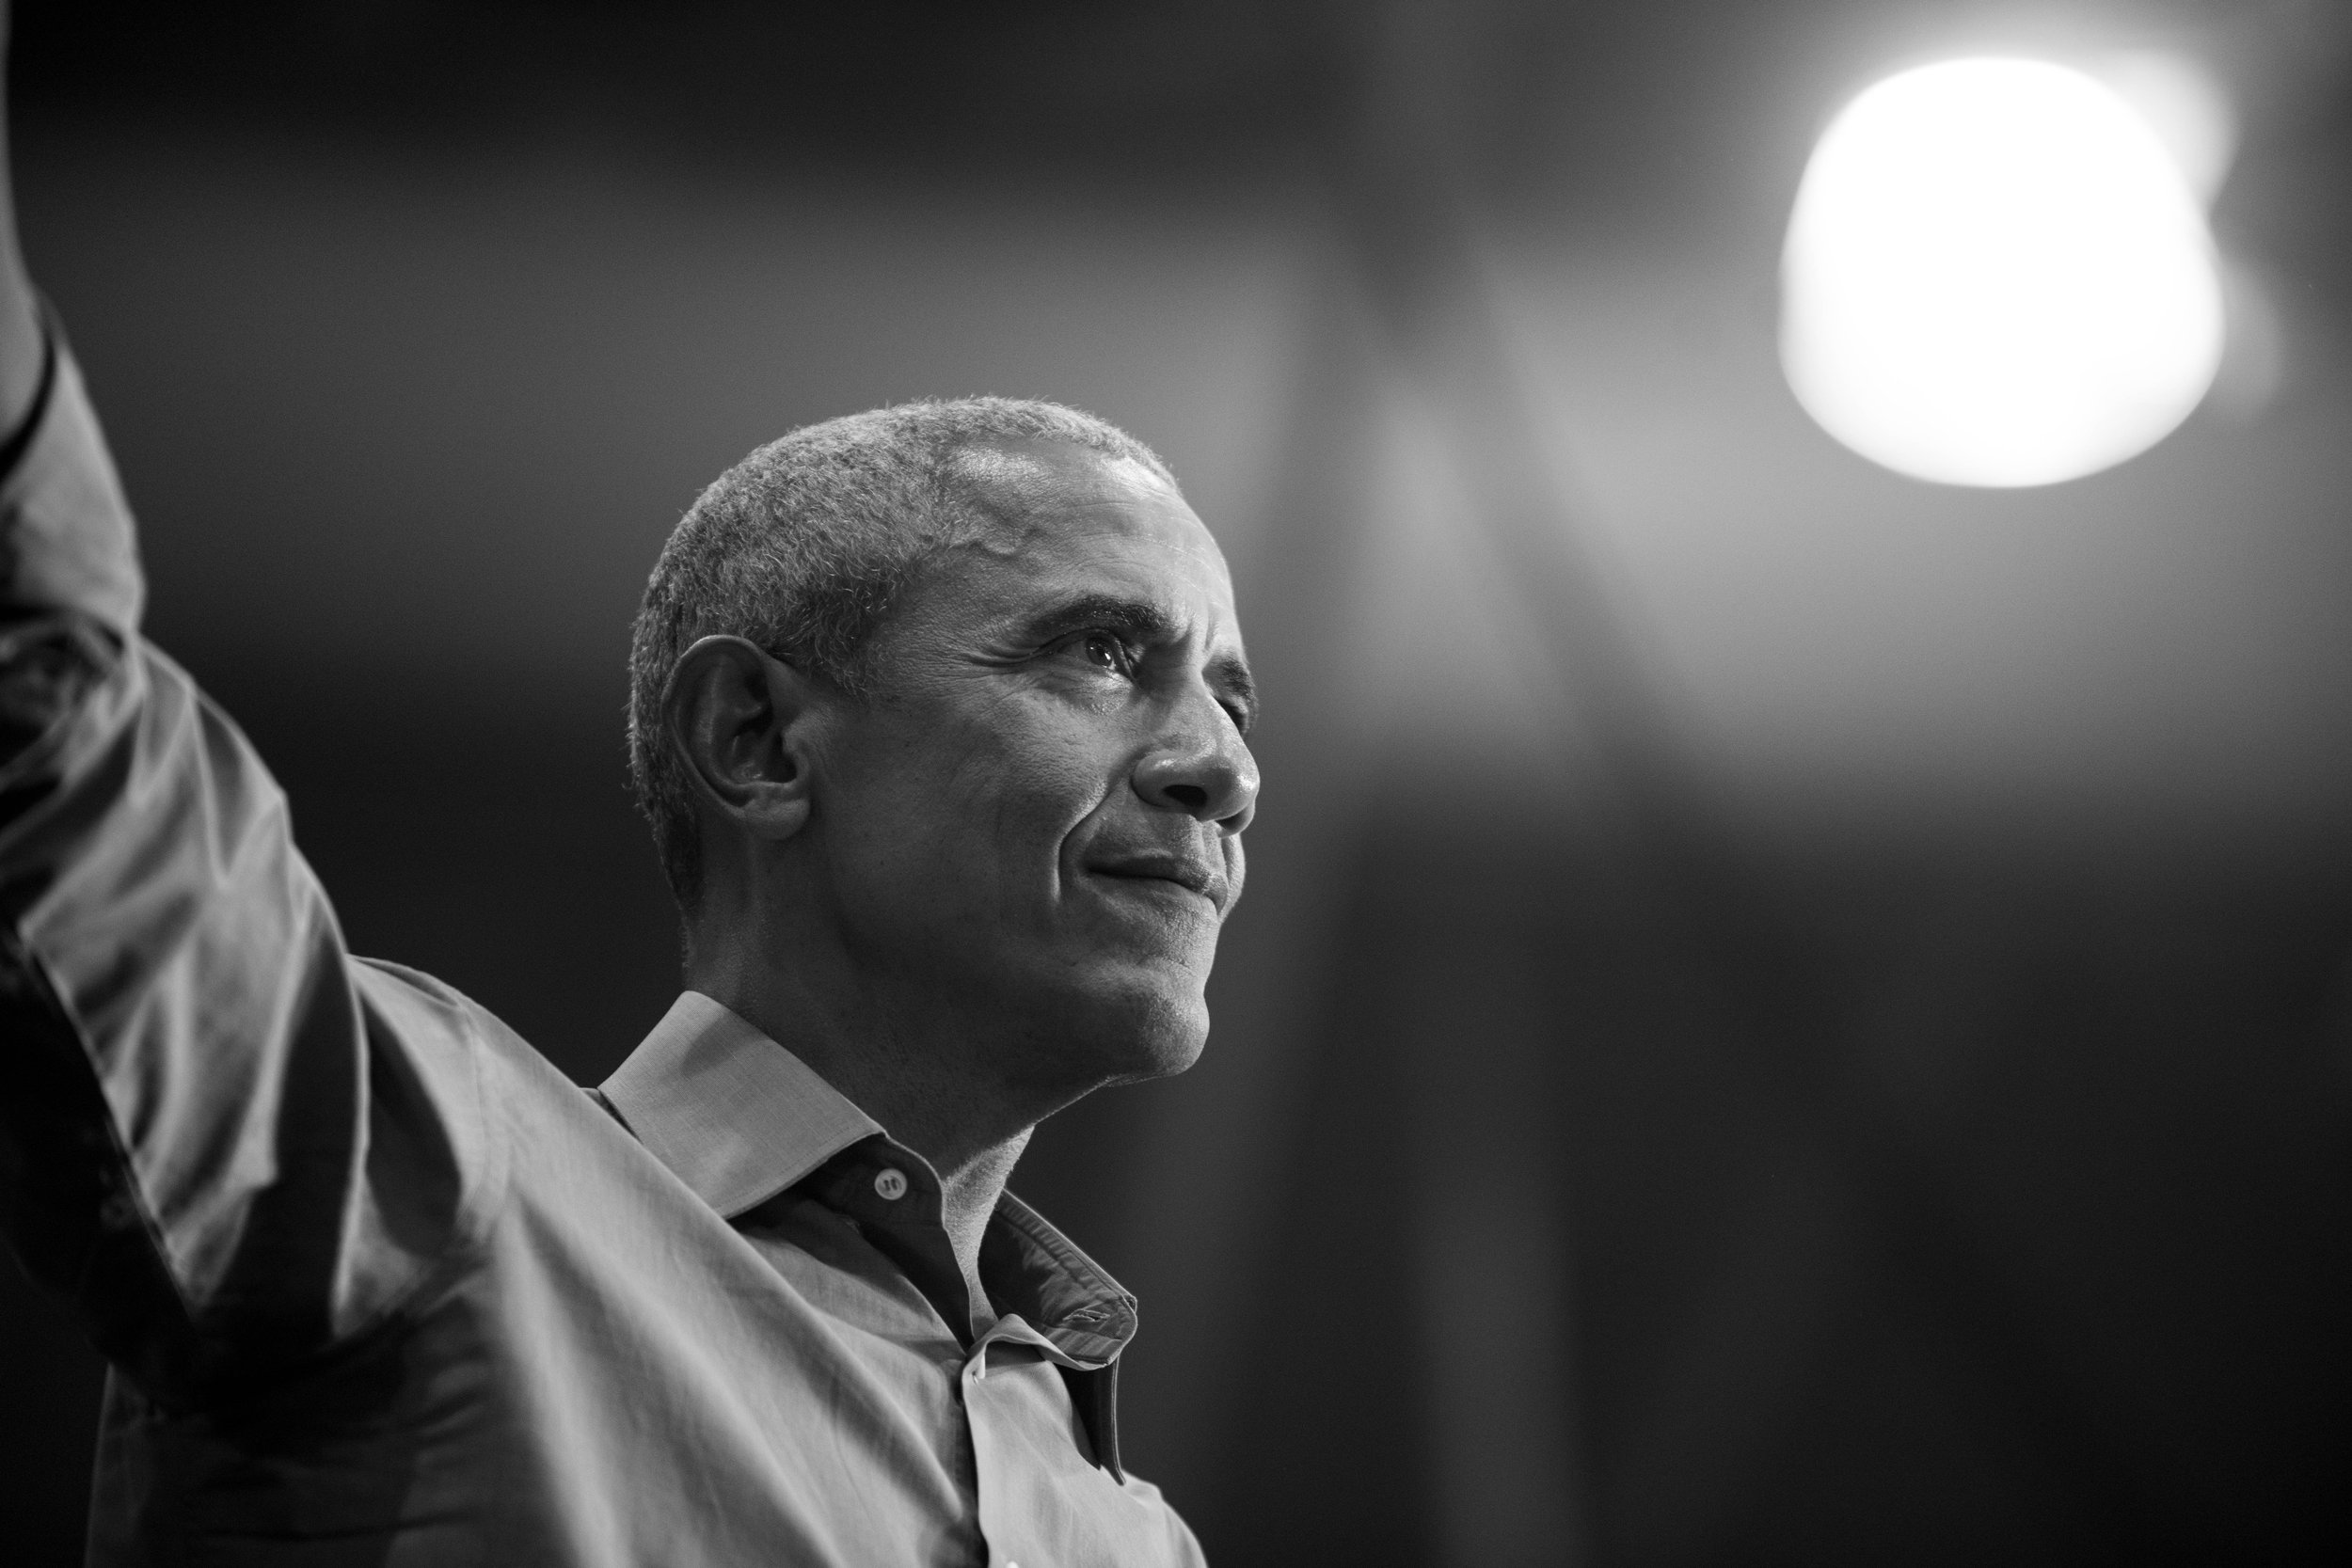 President Barack Obama at a campaign event in Wisconsin, 2022